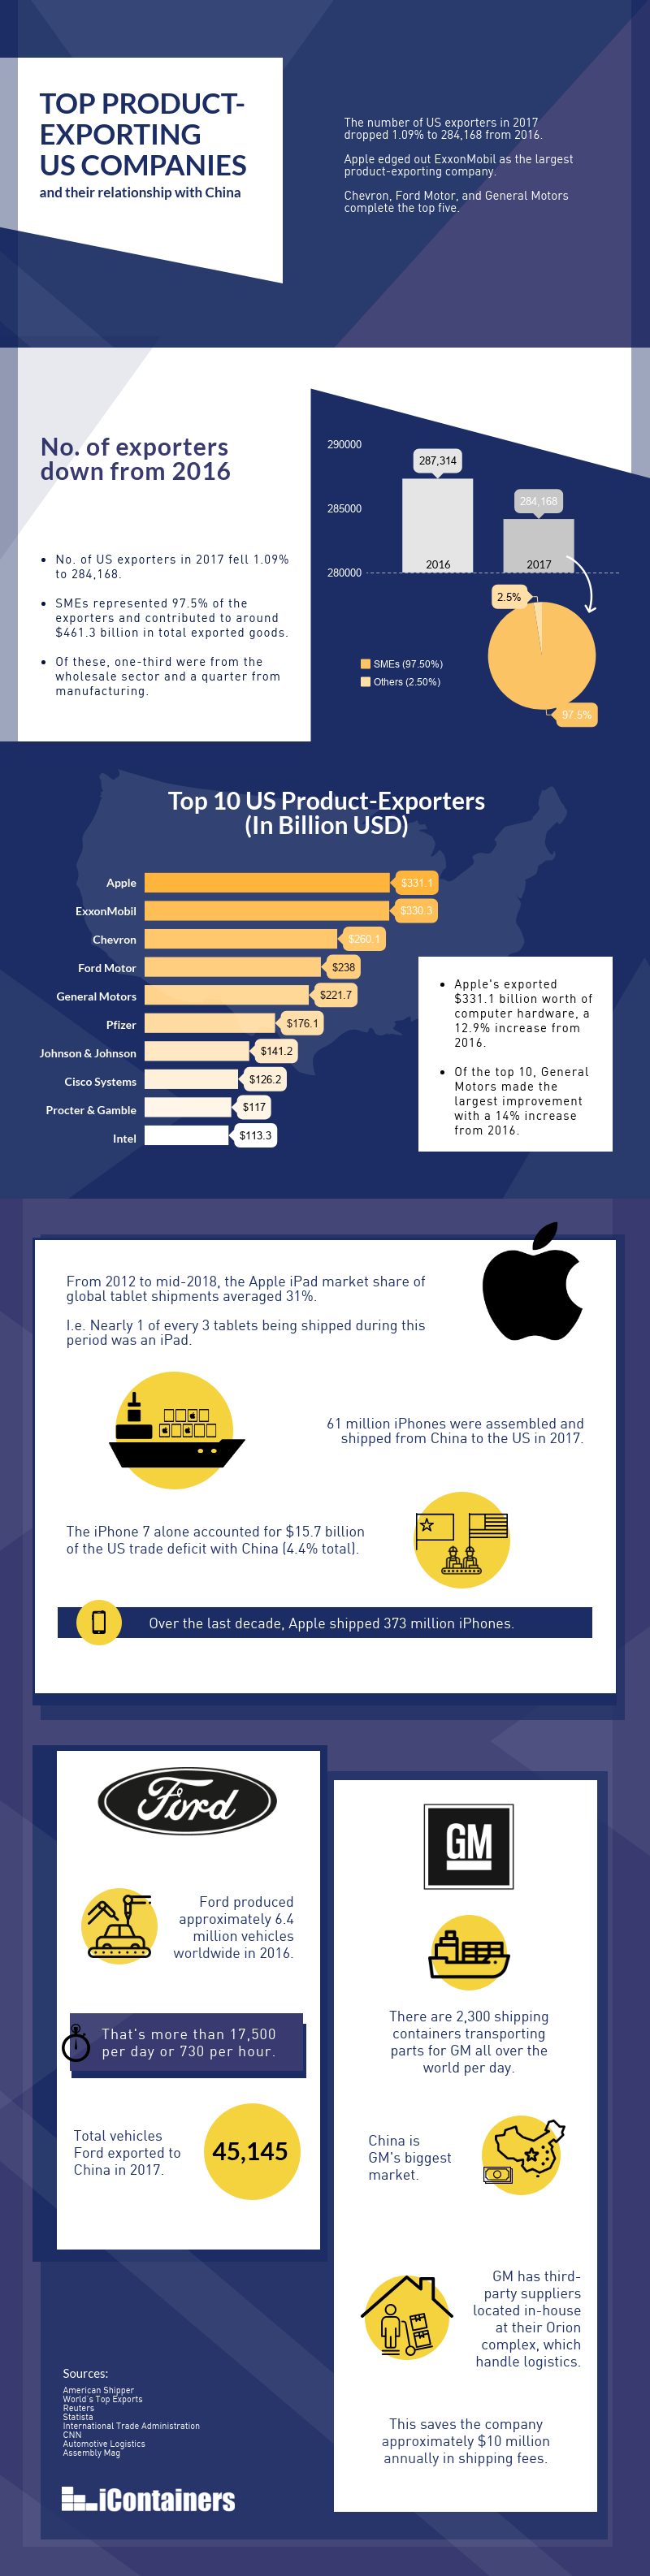 top-products-exporting-us-companies-infographic.png